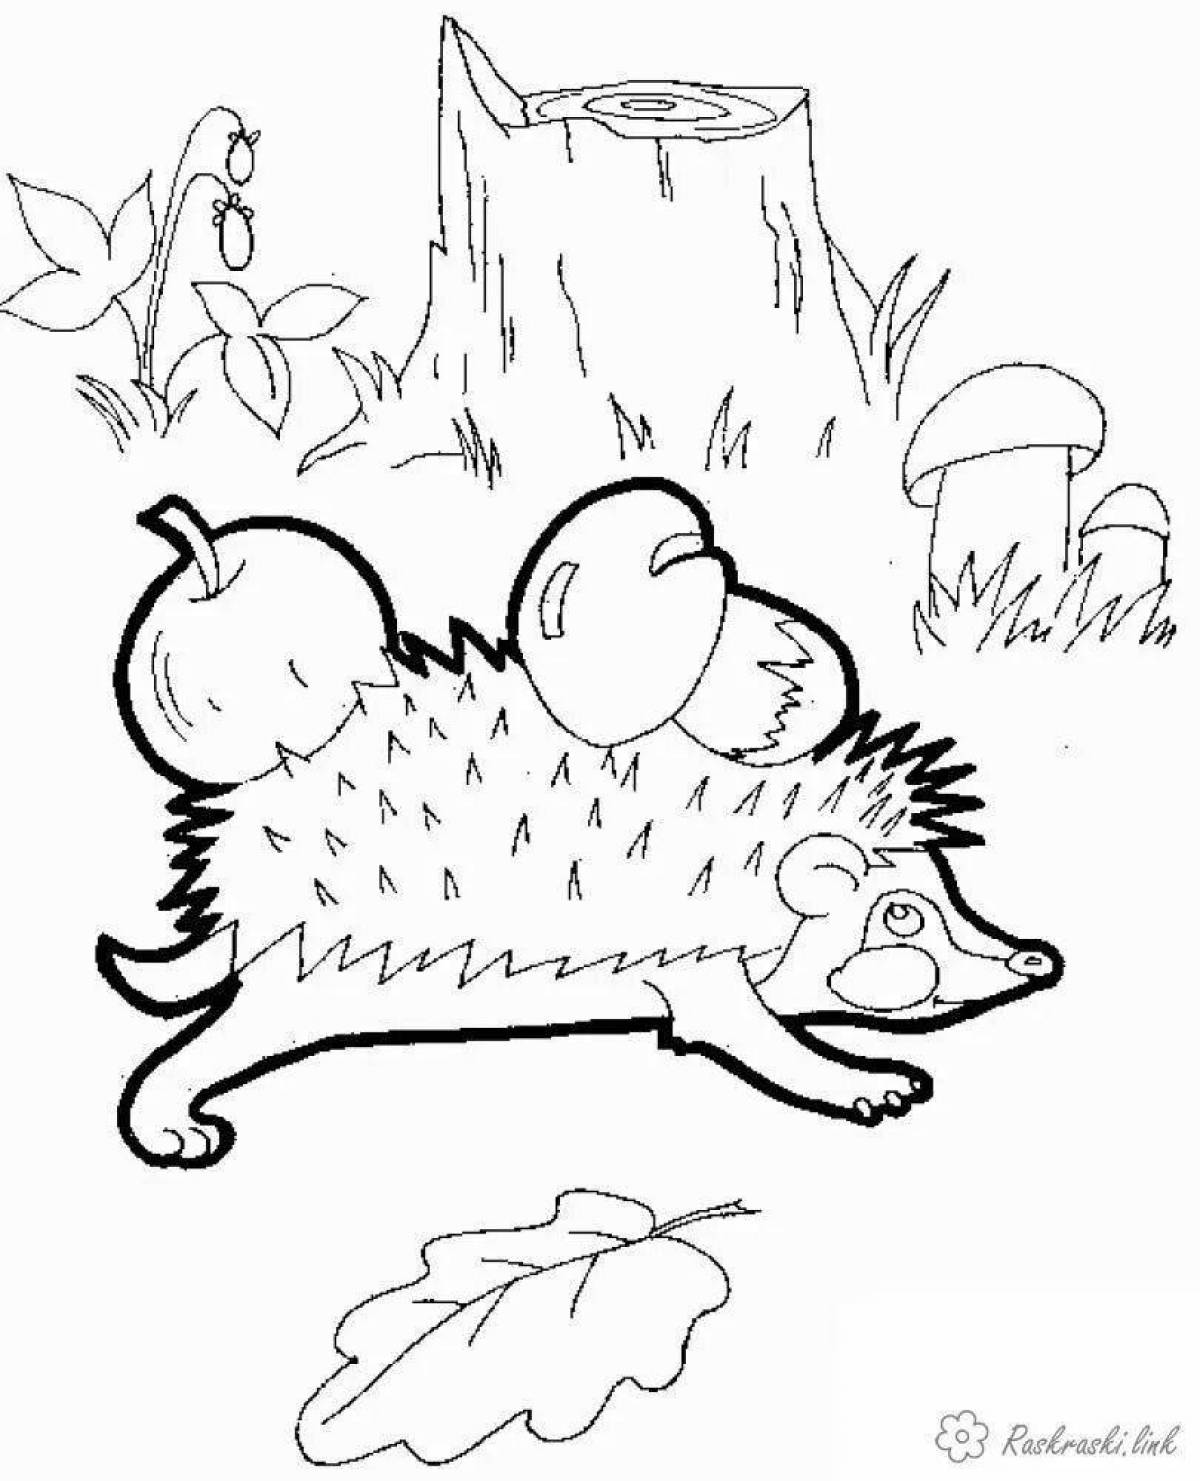 Awesome drawing of a hedgehog